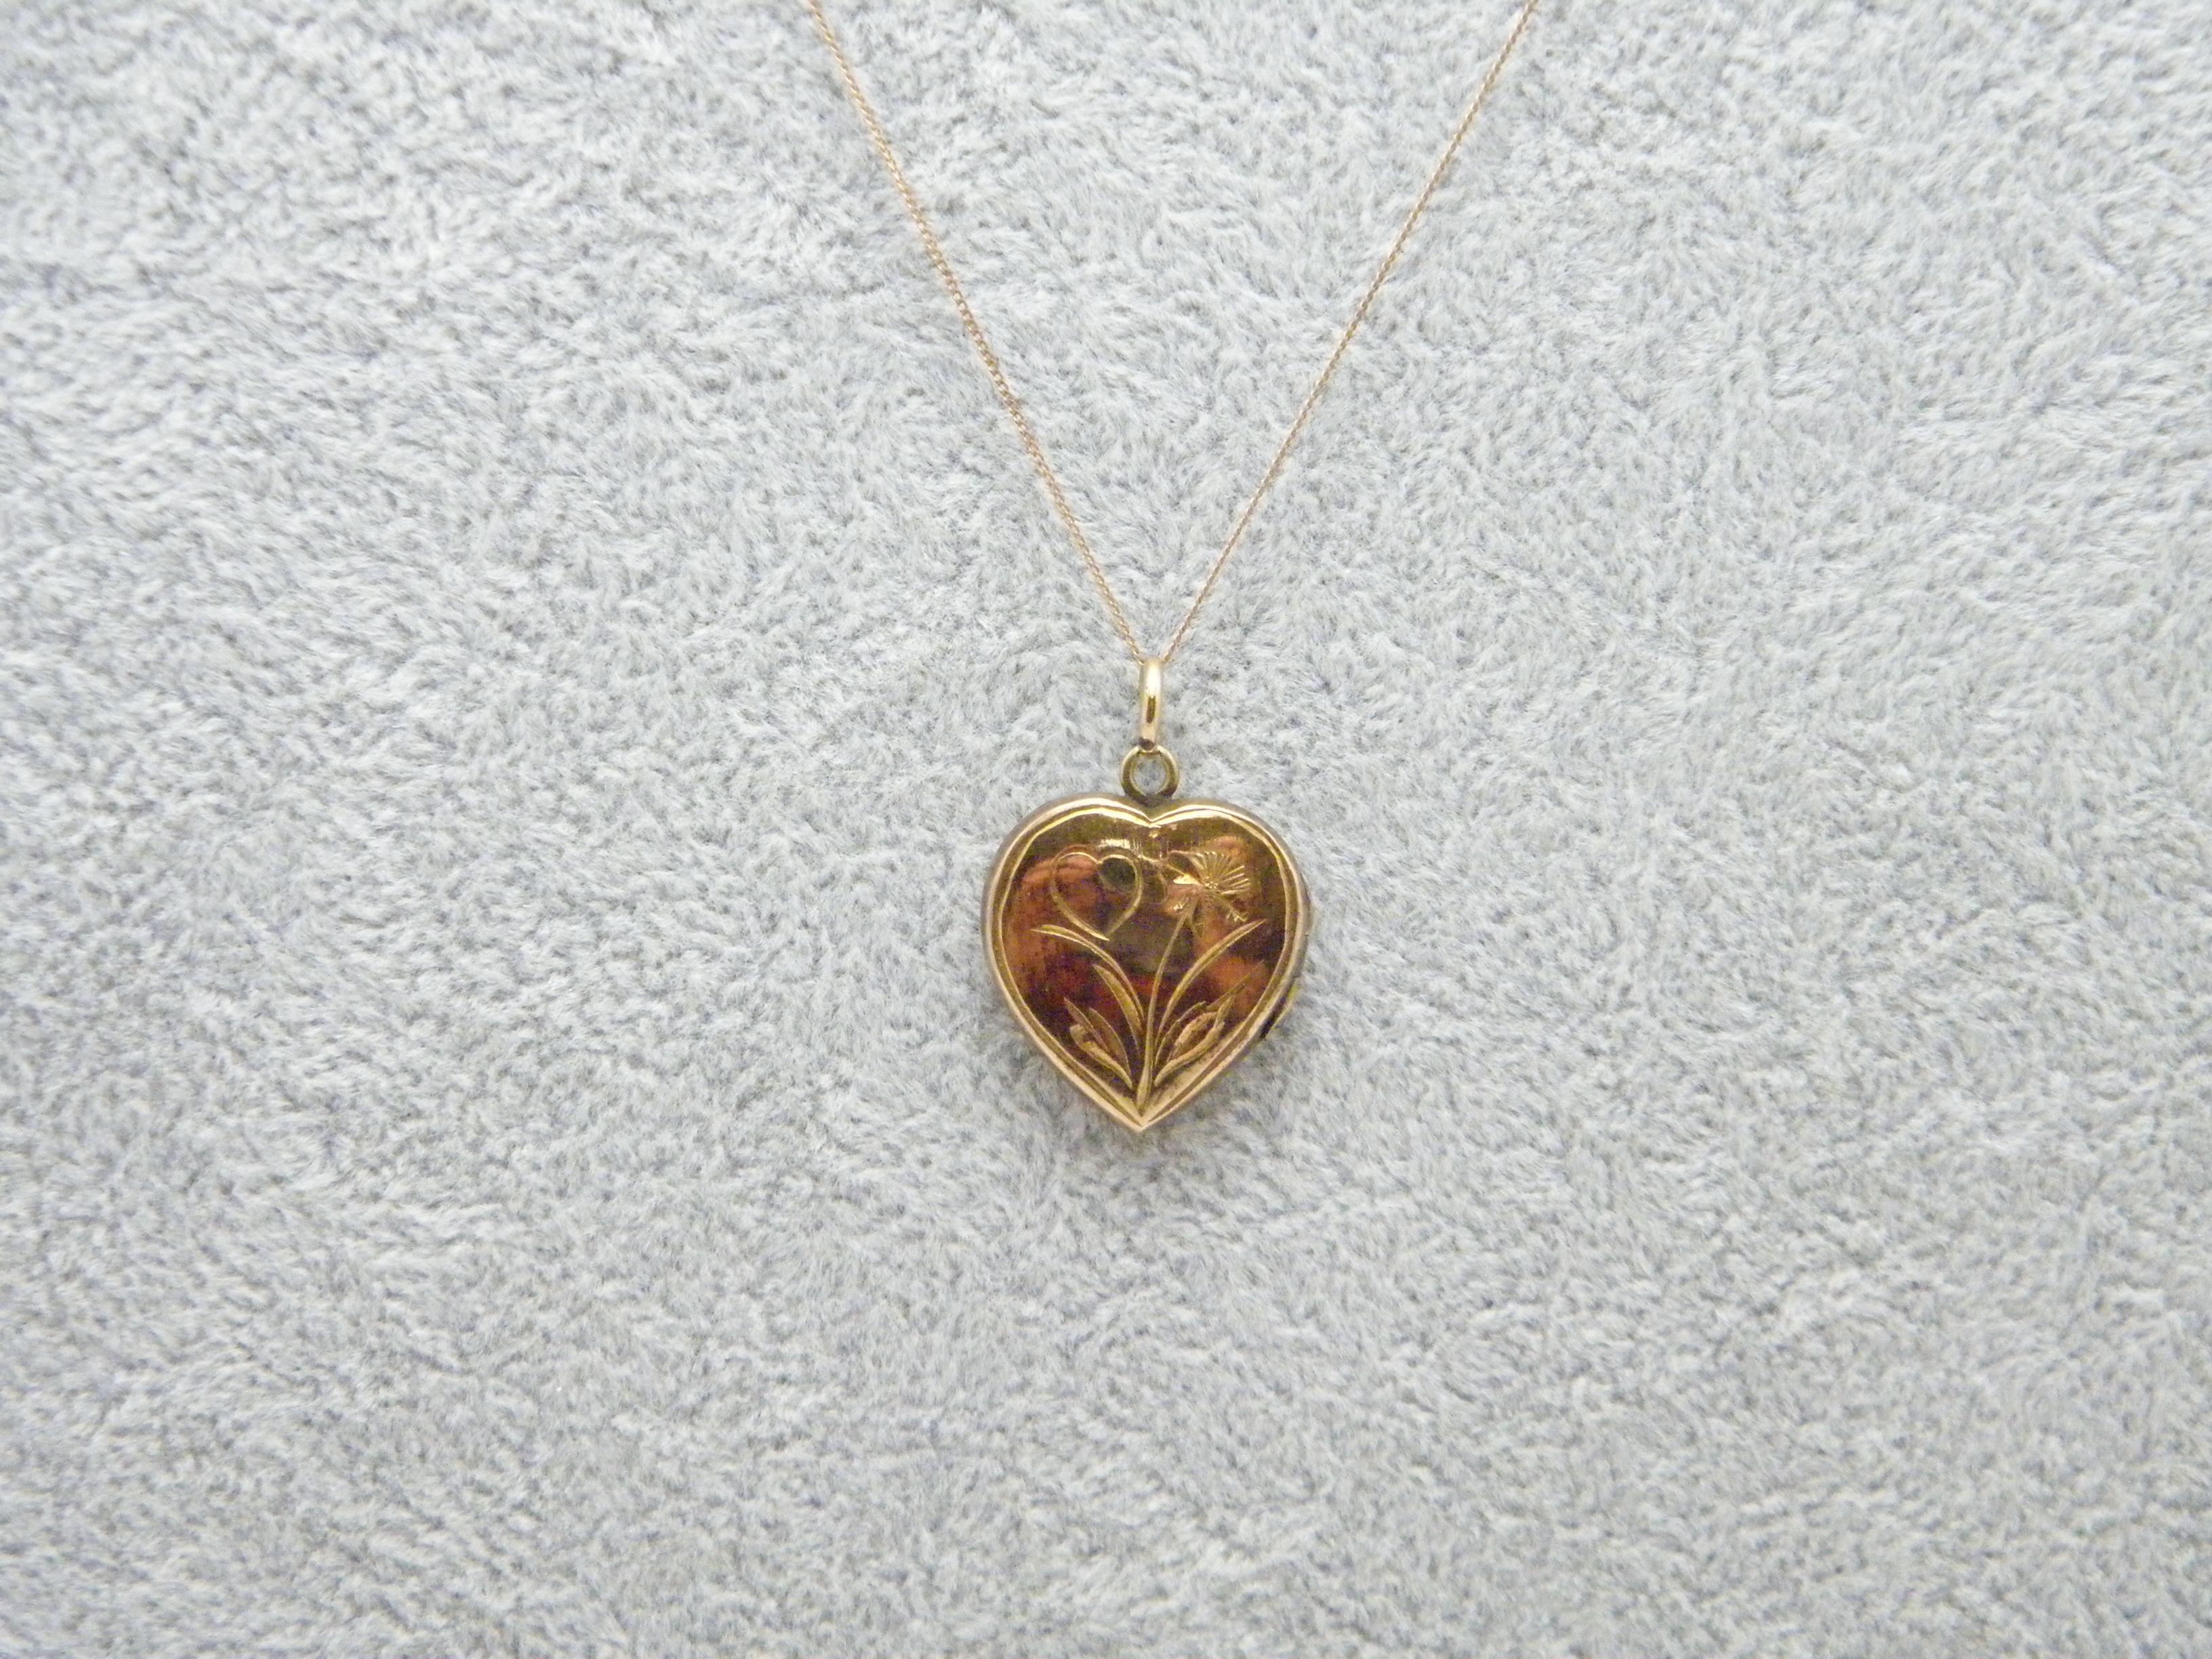 If you have landed on this page then you have an eye for beauty.

On offer is this gorgeous

14CT ROSE GOLD ANTIQUE HEART LOCKET PENDANT NECKLACE

PENDANT DESCRIPTION
DETAILS
Material: Solid 14ct (585/000) rose gold
Style: Opening keepsake locket